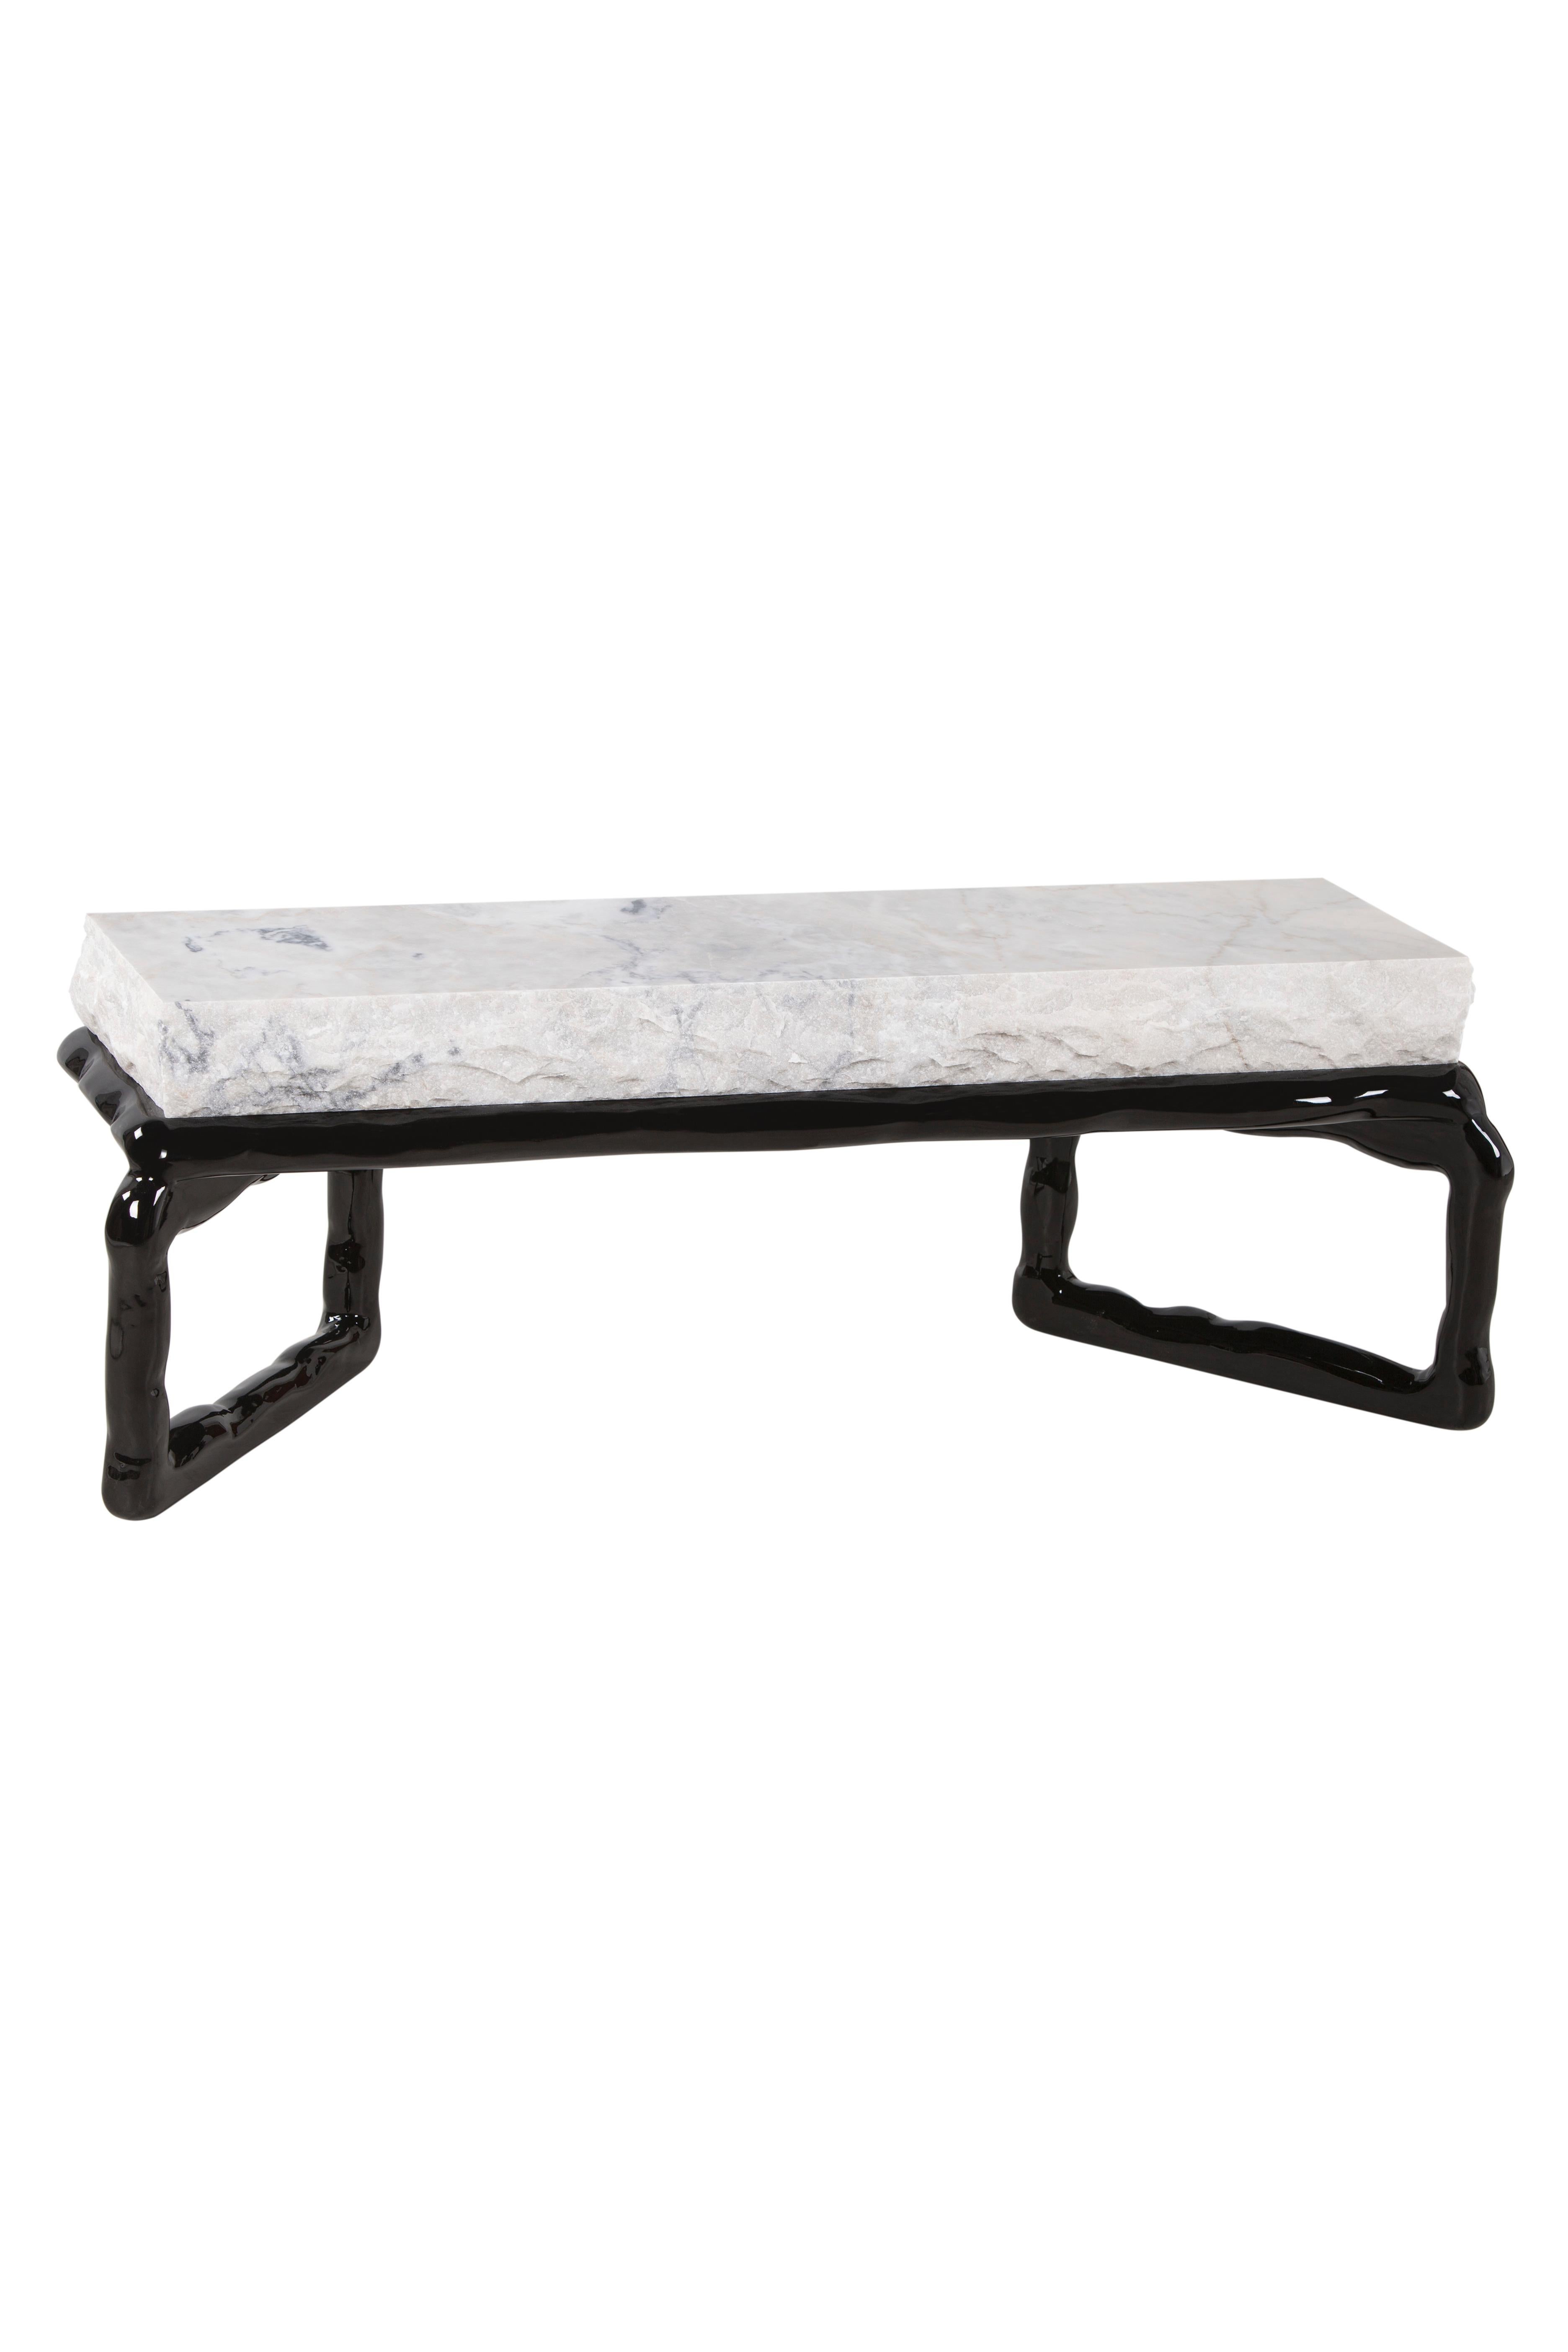 Modern Art Deco Stone Coffee Table Calacatta Marble Handmade in Portugal by Greenapple For Sale